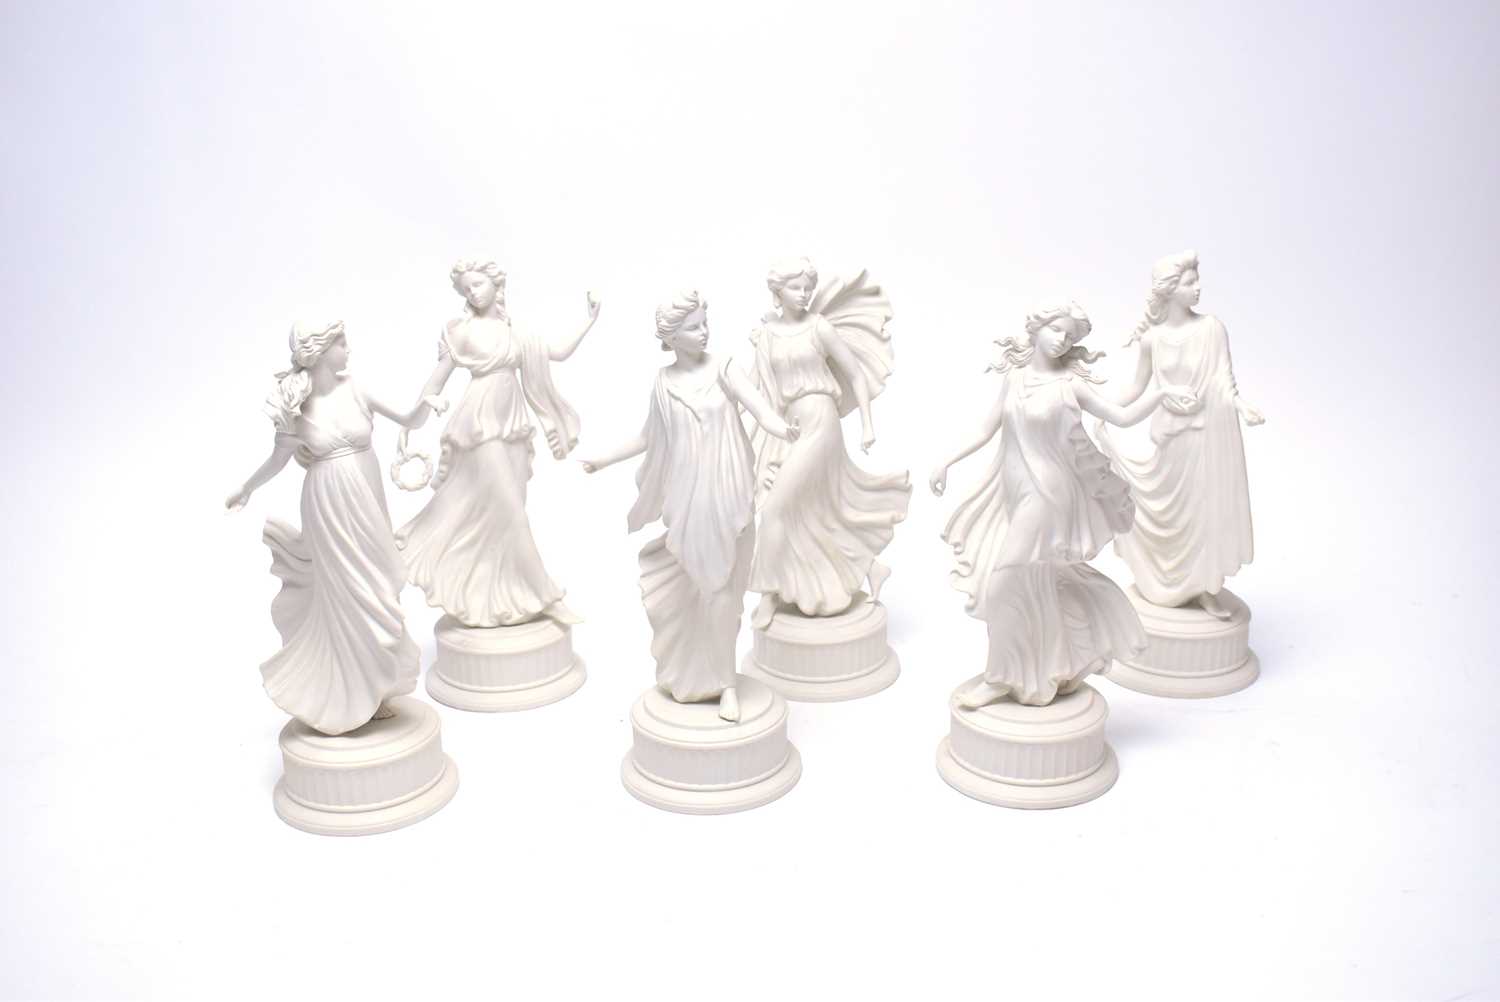 Lot 403 - A set of Wedgwood limited edition ‘The Dancing Hours’ Collection blanc de chine figures of ladies.